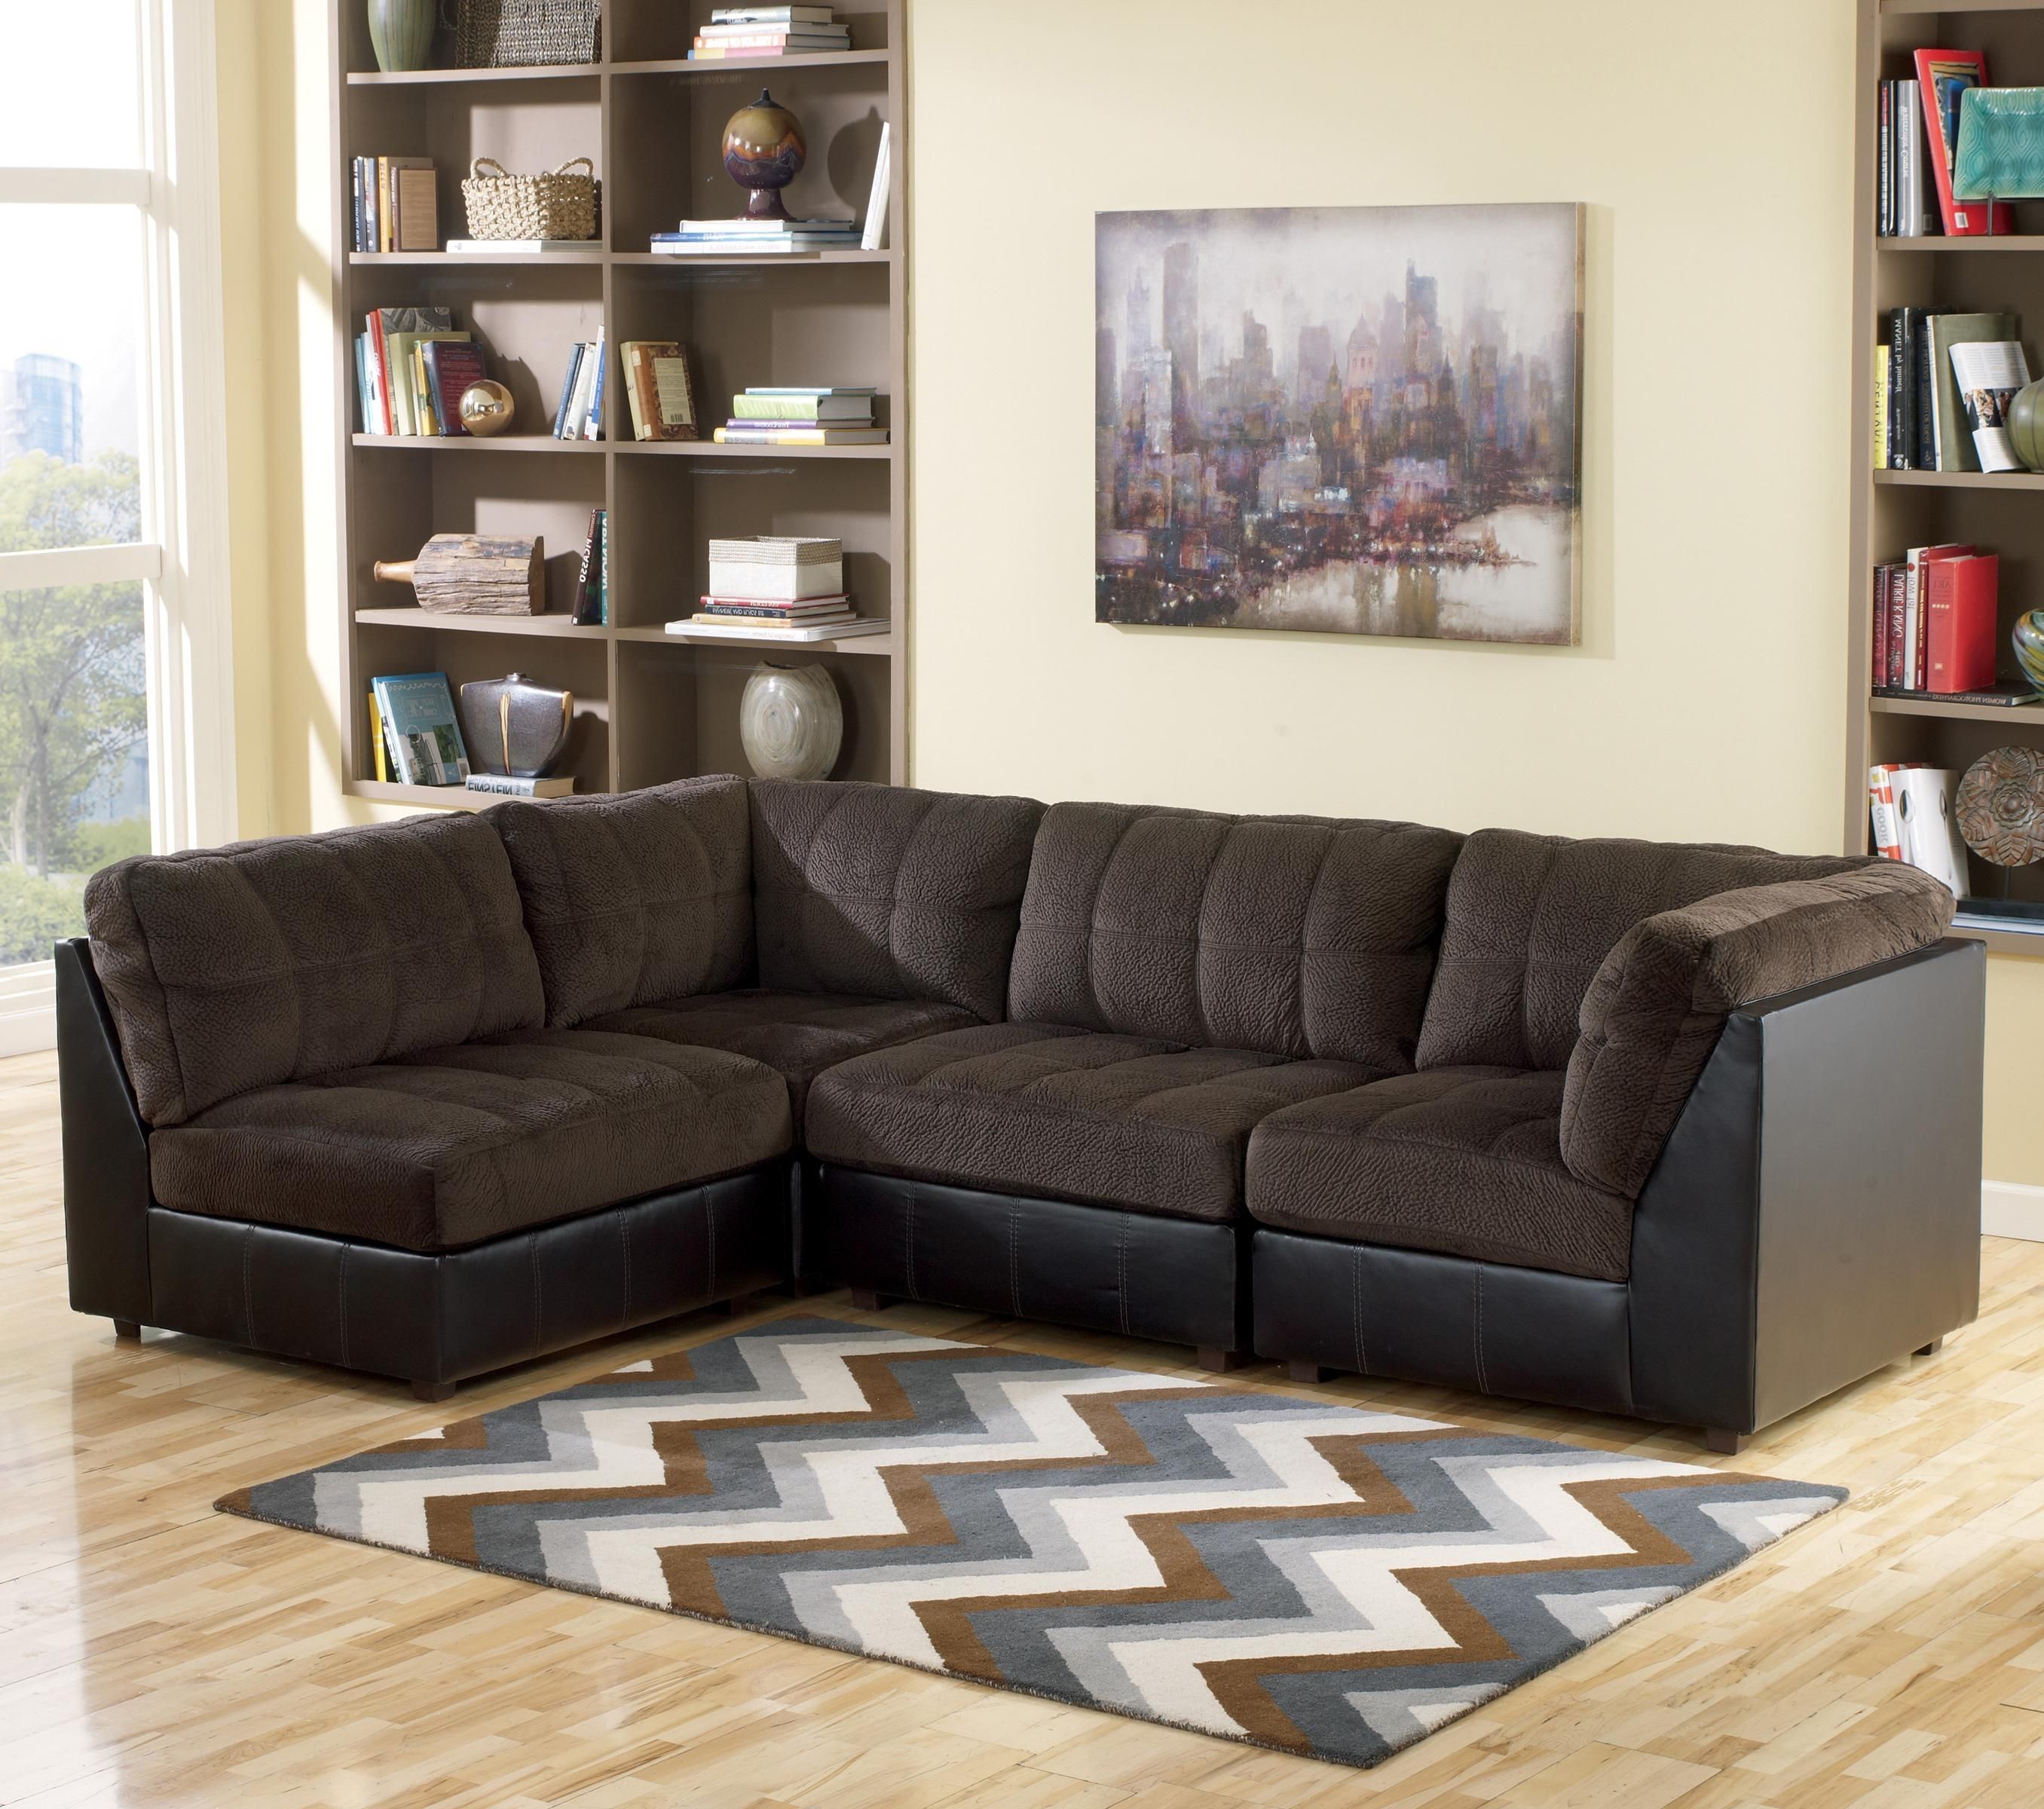 Signature Designashley Hobokin – Chocolate Contemporary 4 Piece In Blaine 4 Piece Sectionals (View 22 of 25)